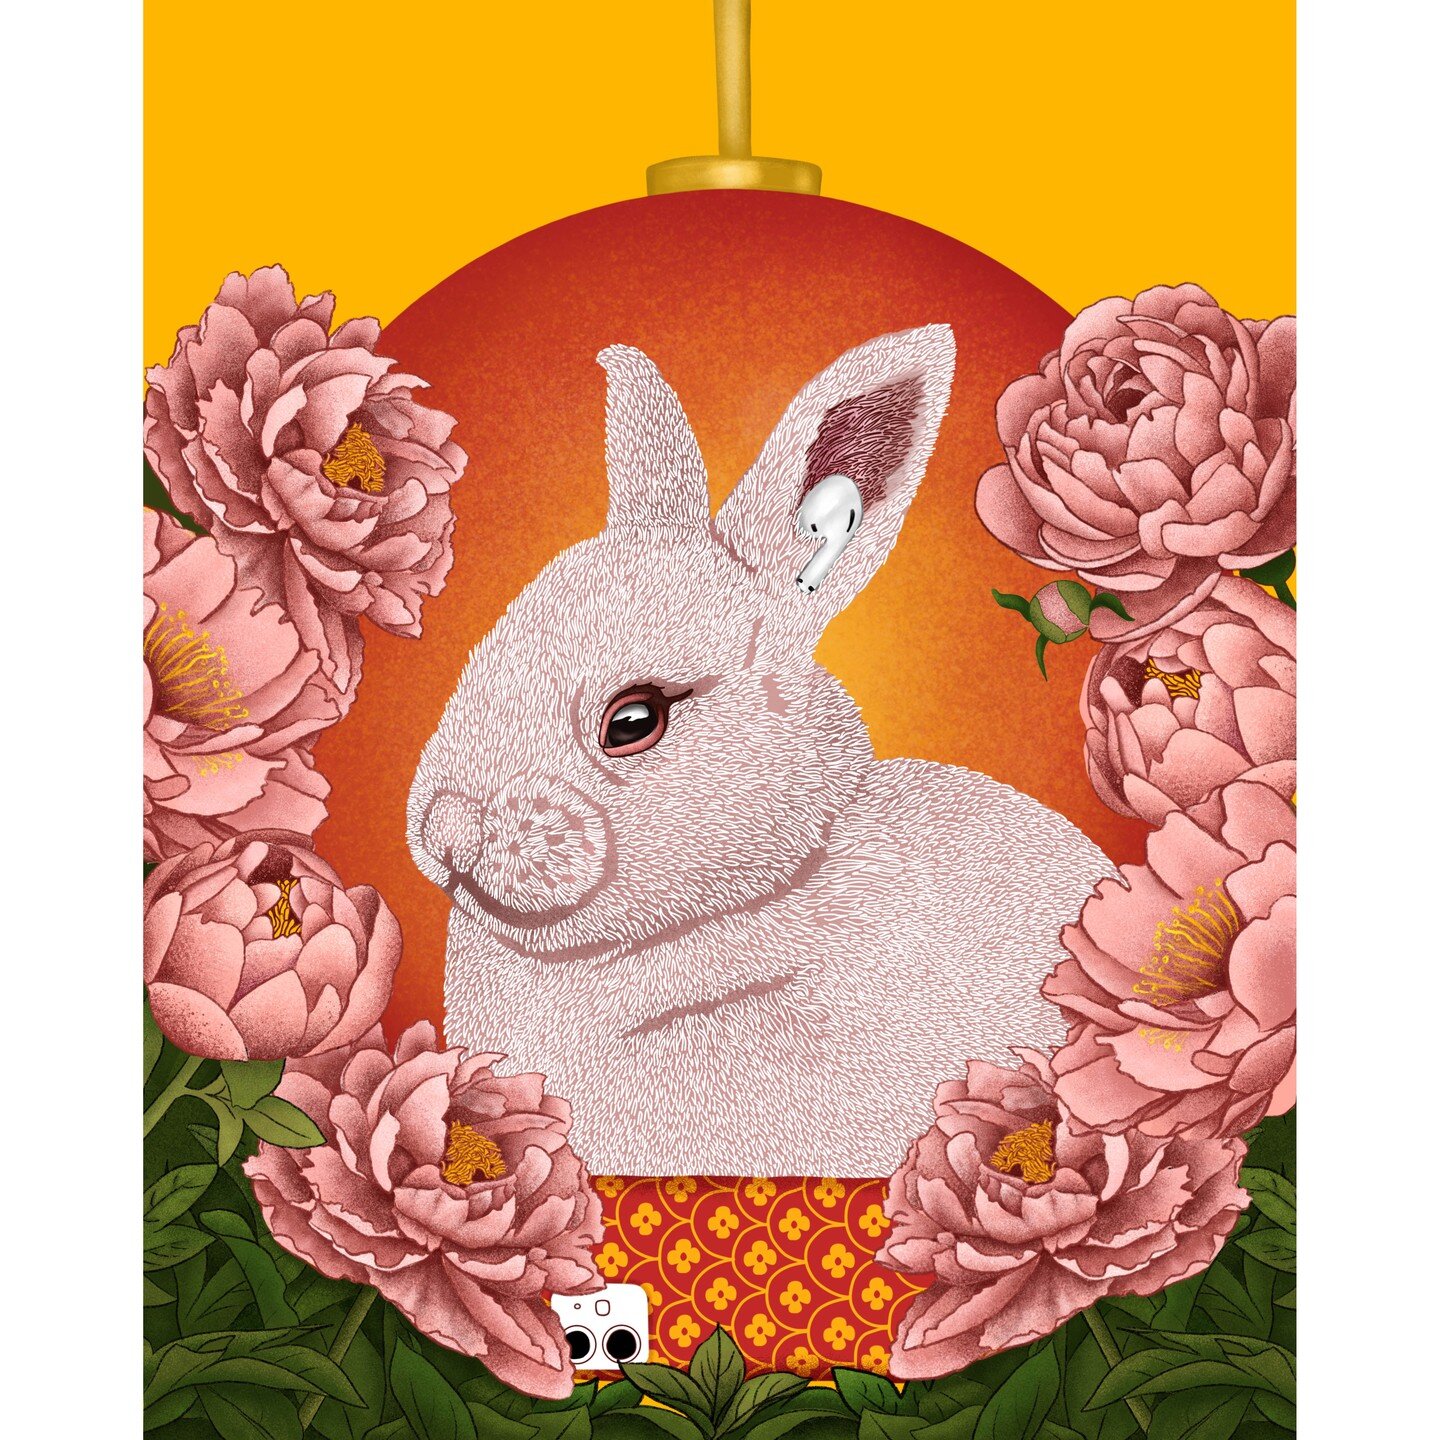 After a long winter's (social media) nap, I'm back!! Couldn't resist a bunny New Year illustration, and I had so much fun shading the peonies (which symbolize wealth, prosperity, and peace). Wishing you all a year of peonies.

#peoniesaremyfavorite #